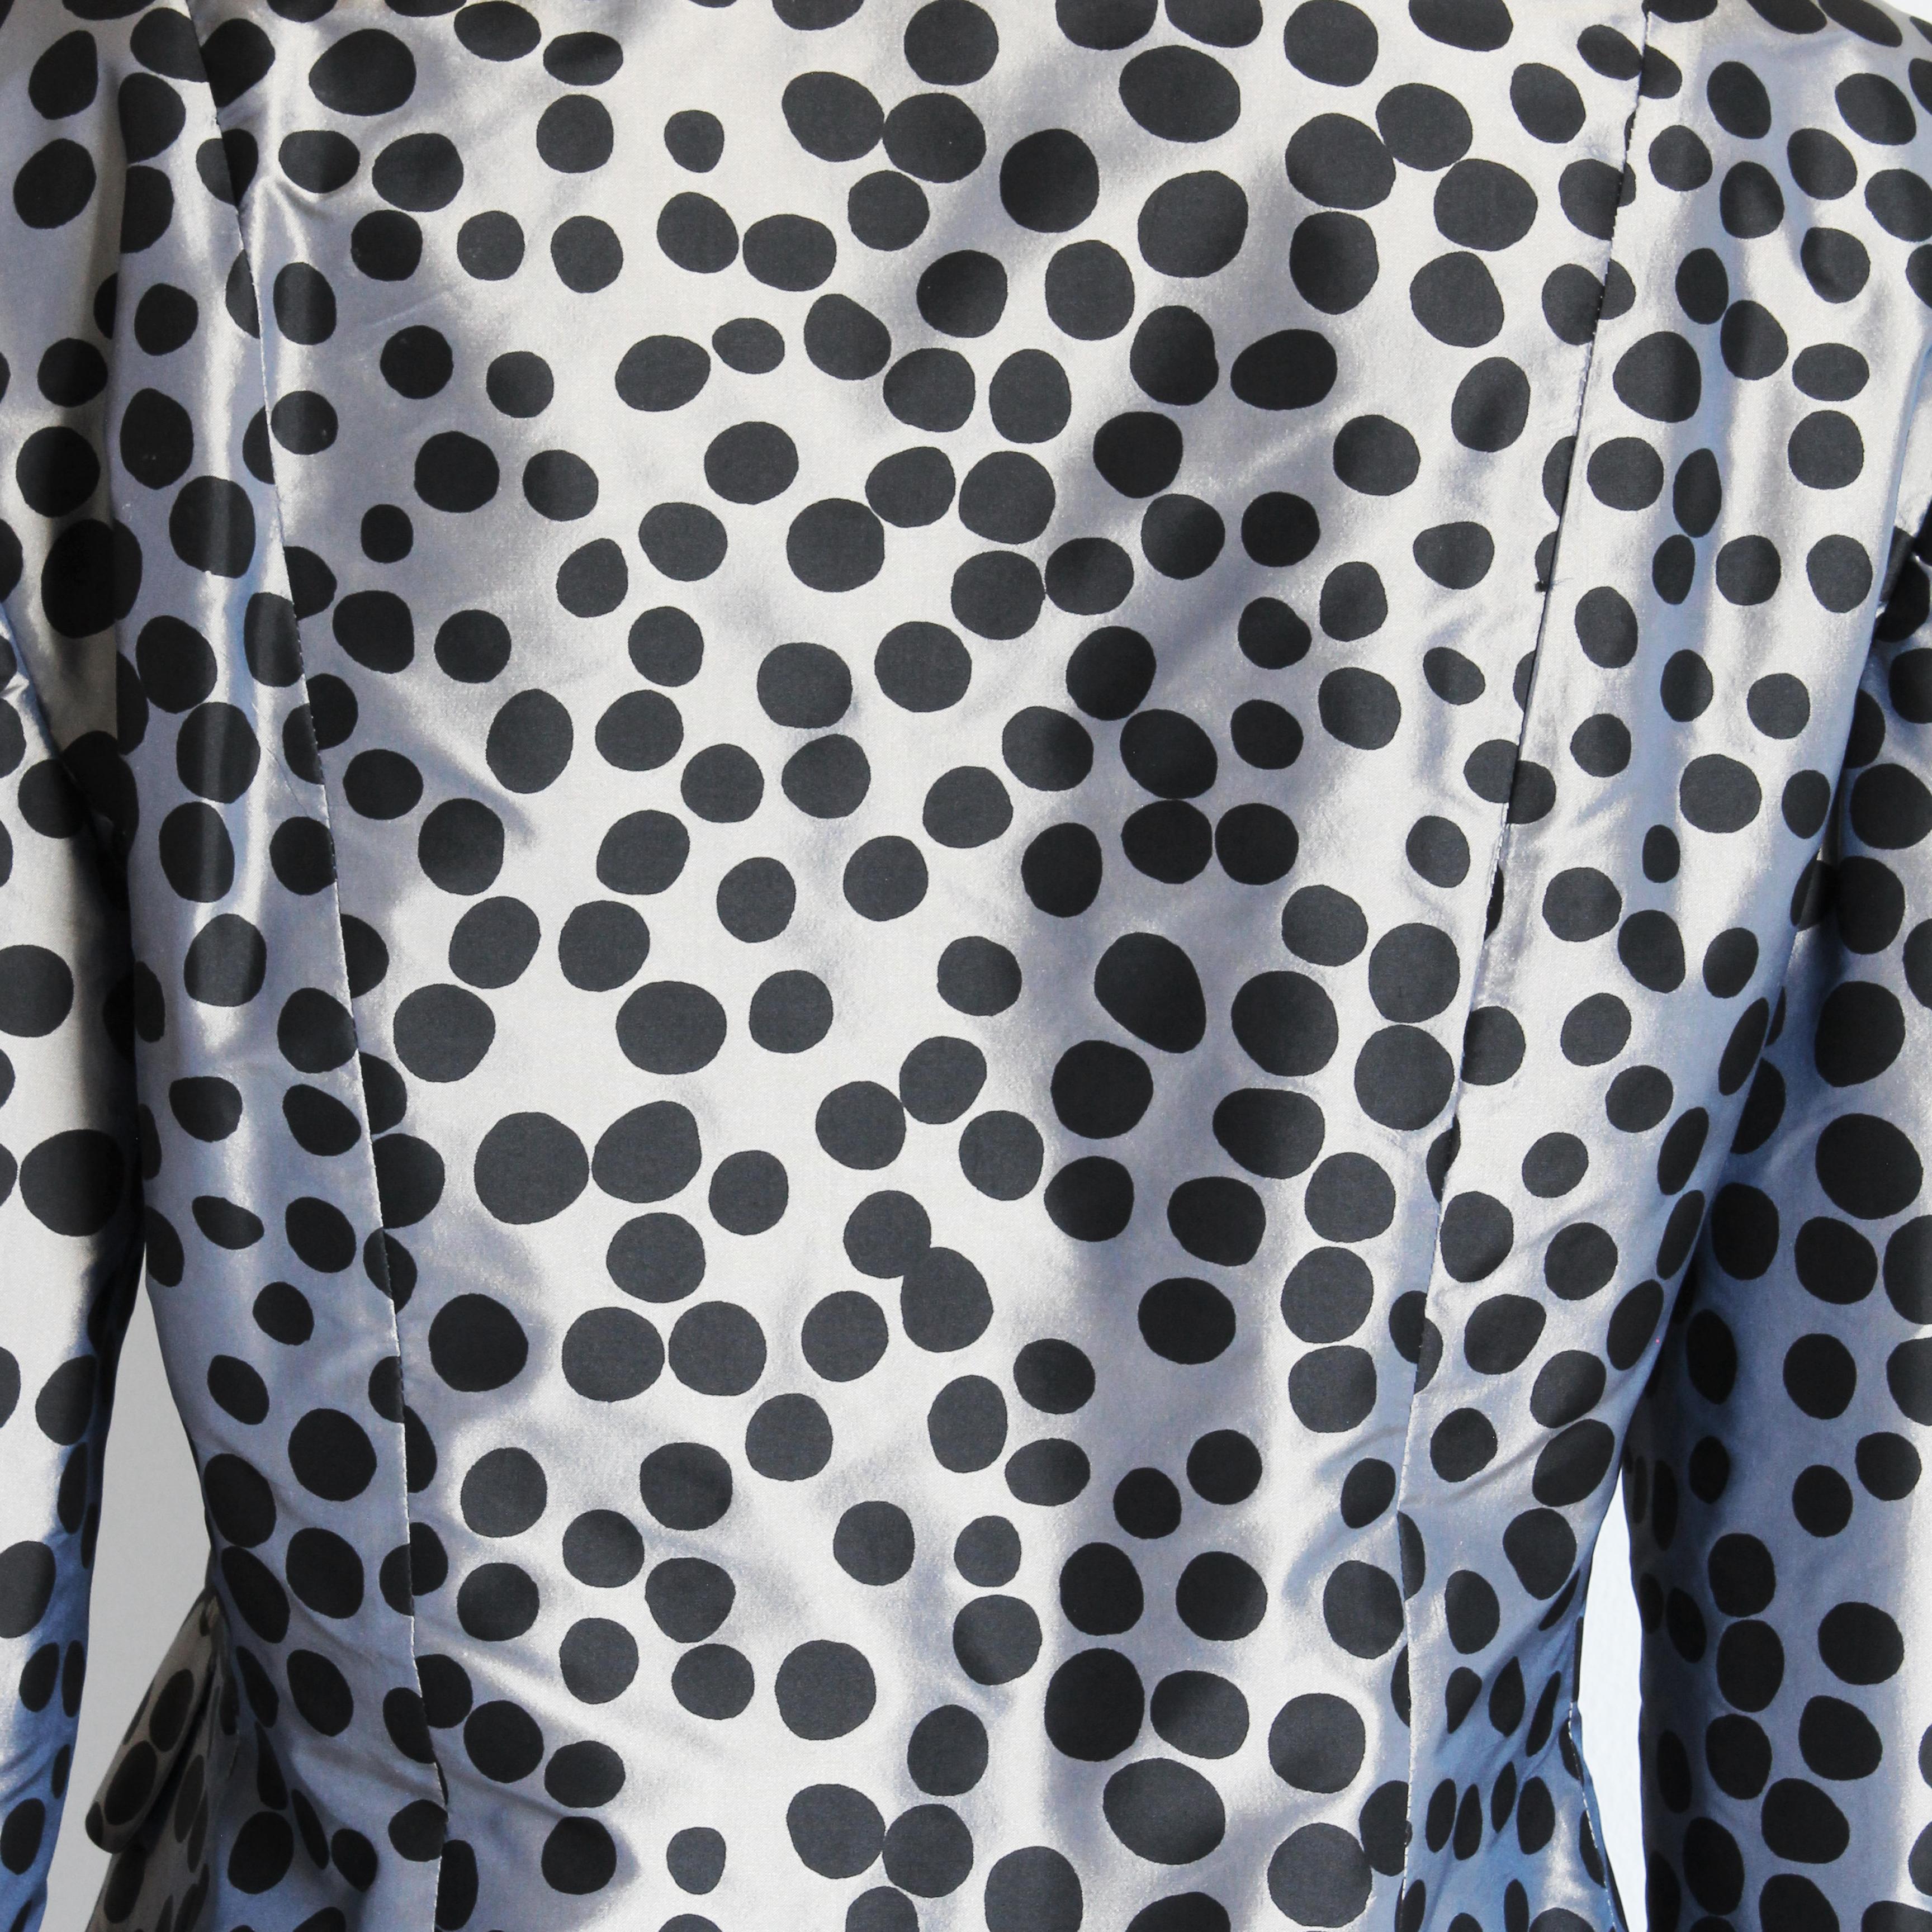 Moschino Jacket Gunmetal Silk with Polka Dots Puff Sleeves Cheap and Chic US 12 For Sale 5